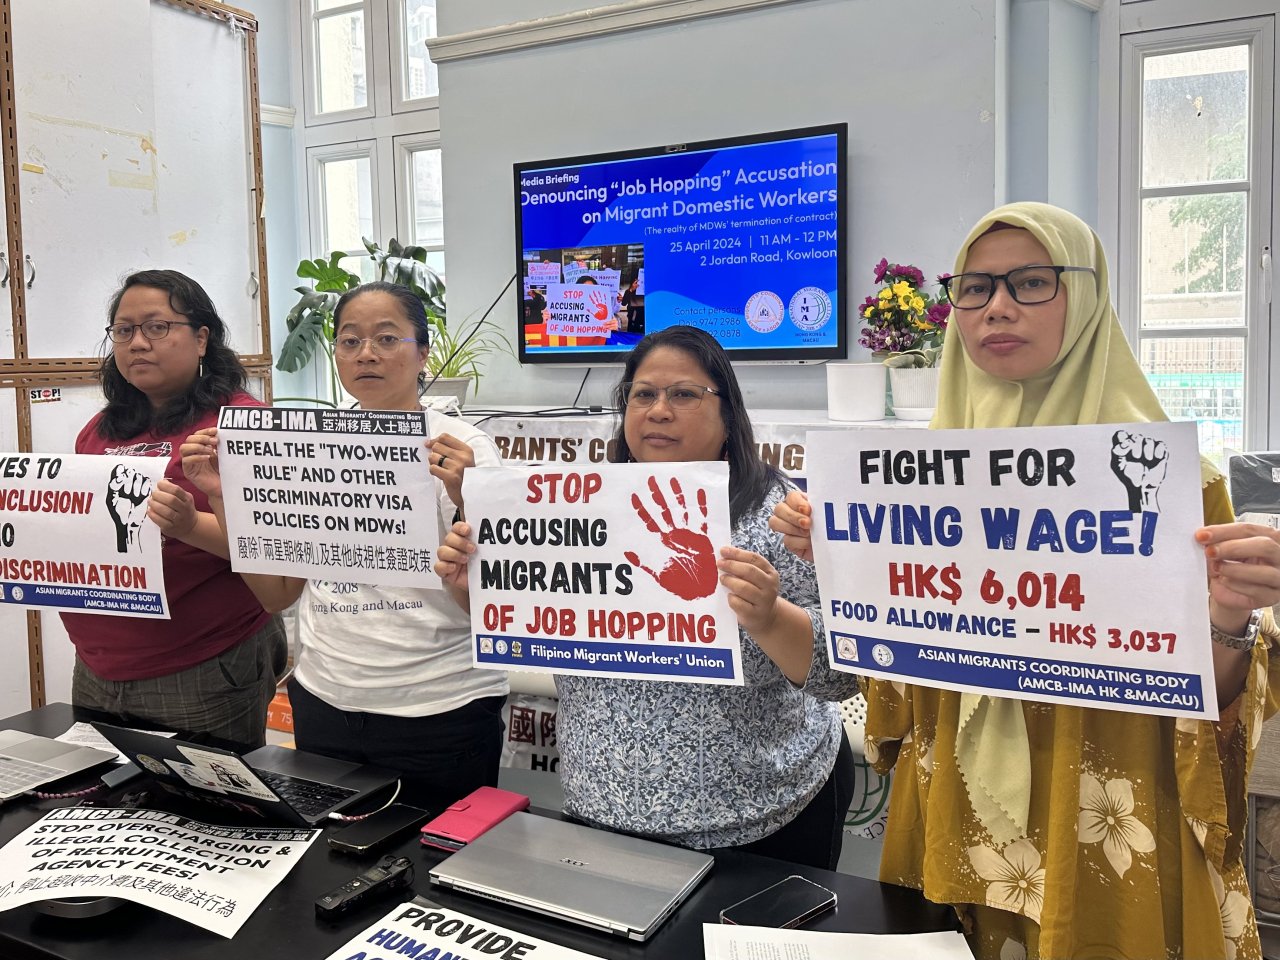 'Anti-migrant sentiment pushes domestic workers away'